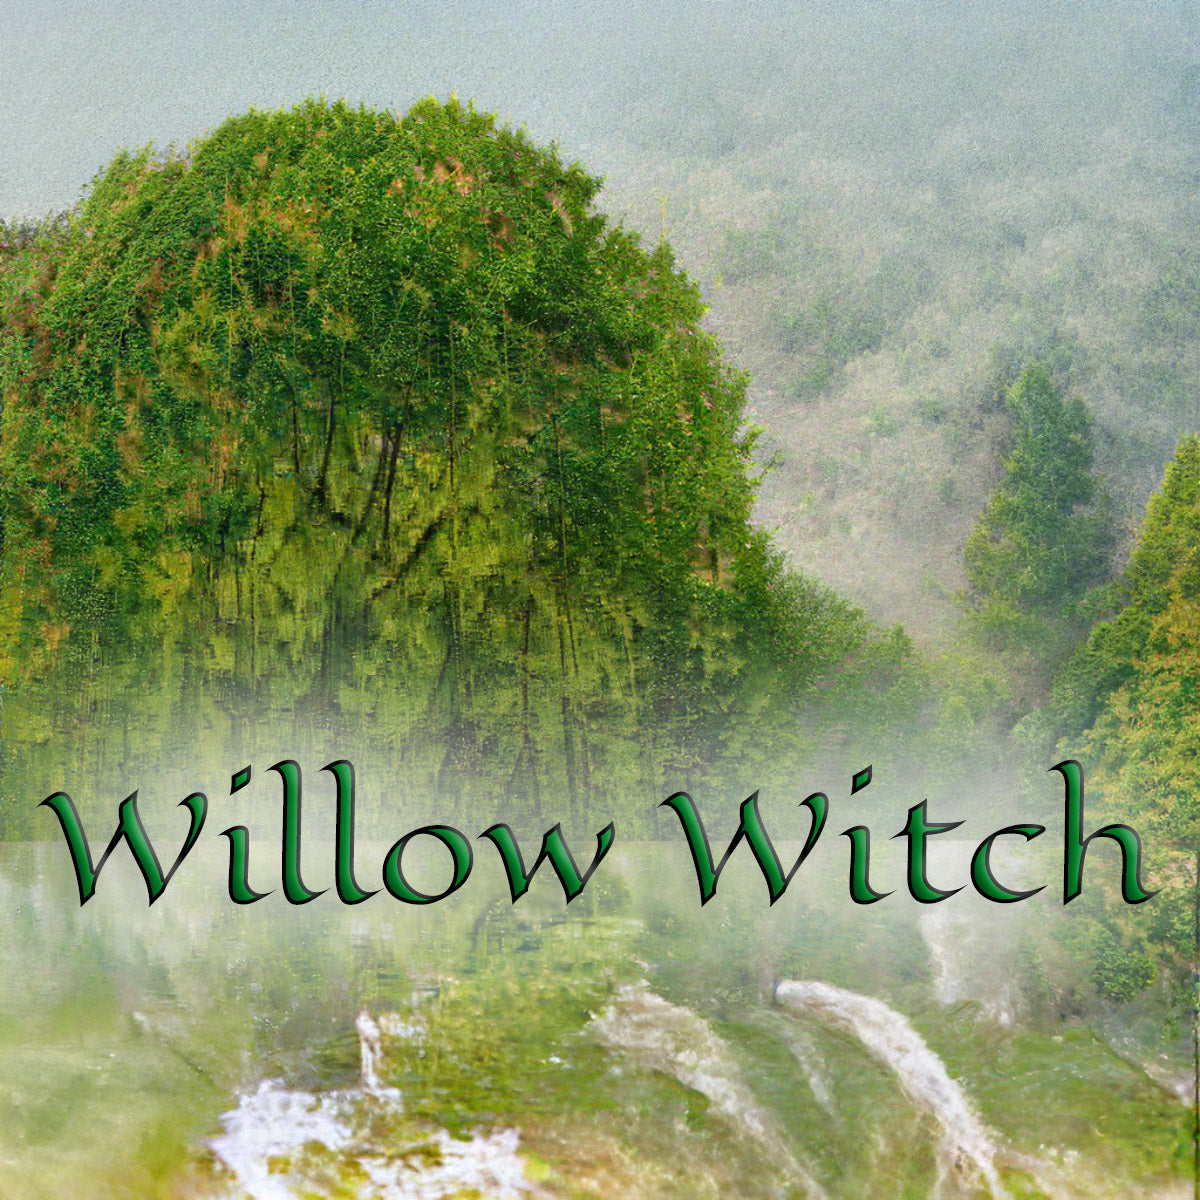 Willow Witch Aromatic Elixir